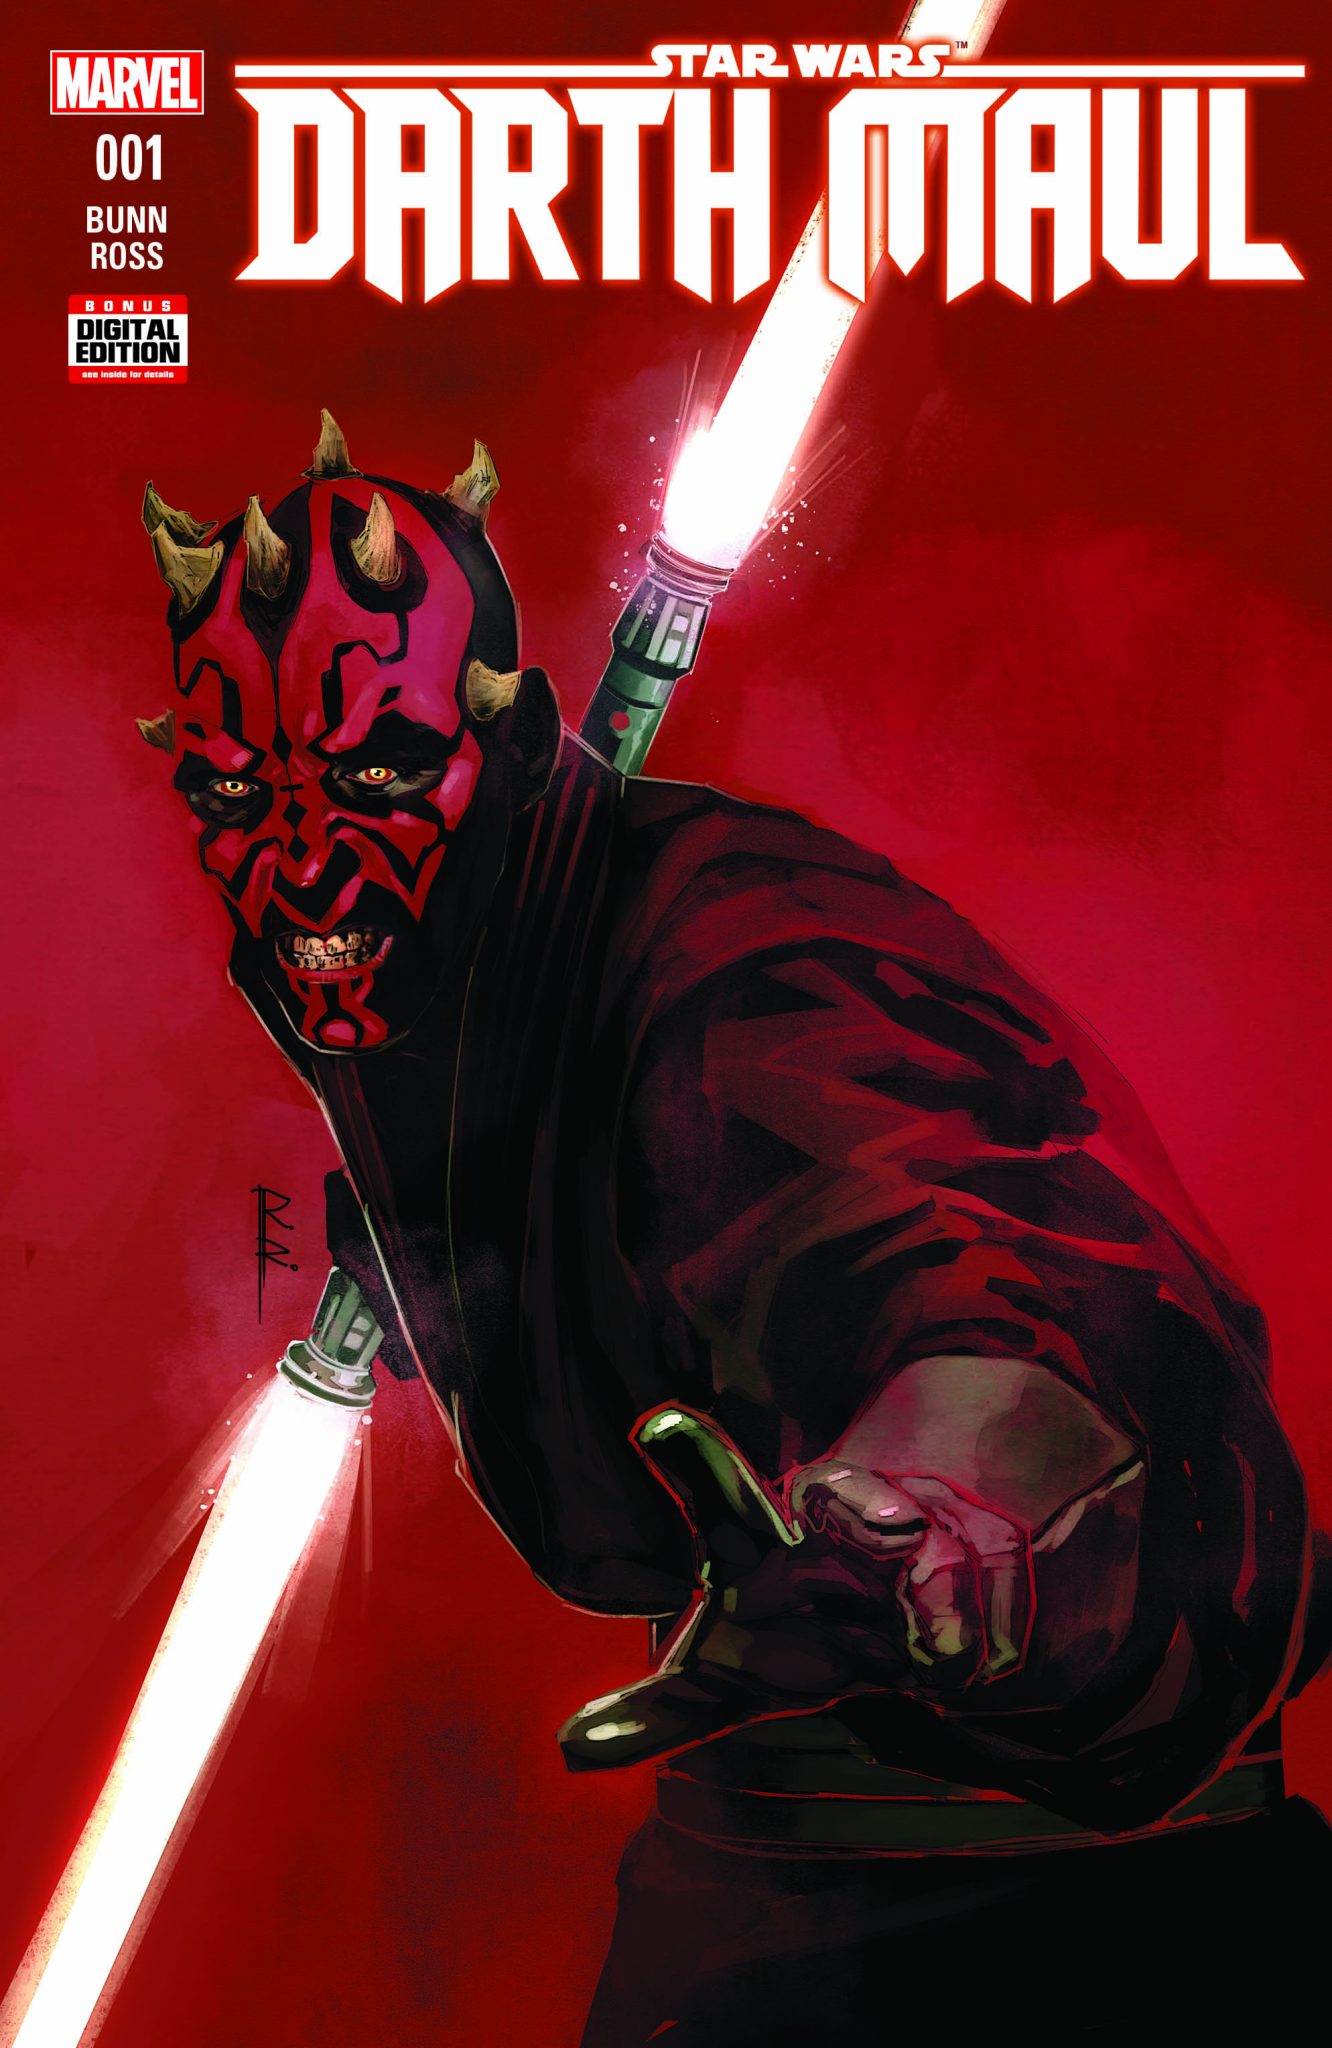 Marvel Comics News Digest 11/14 – 11/18/16 Featuring Darth Maul and Guardians of the Galaxy Solos